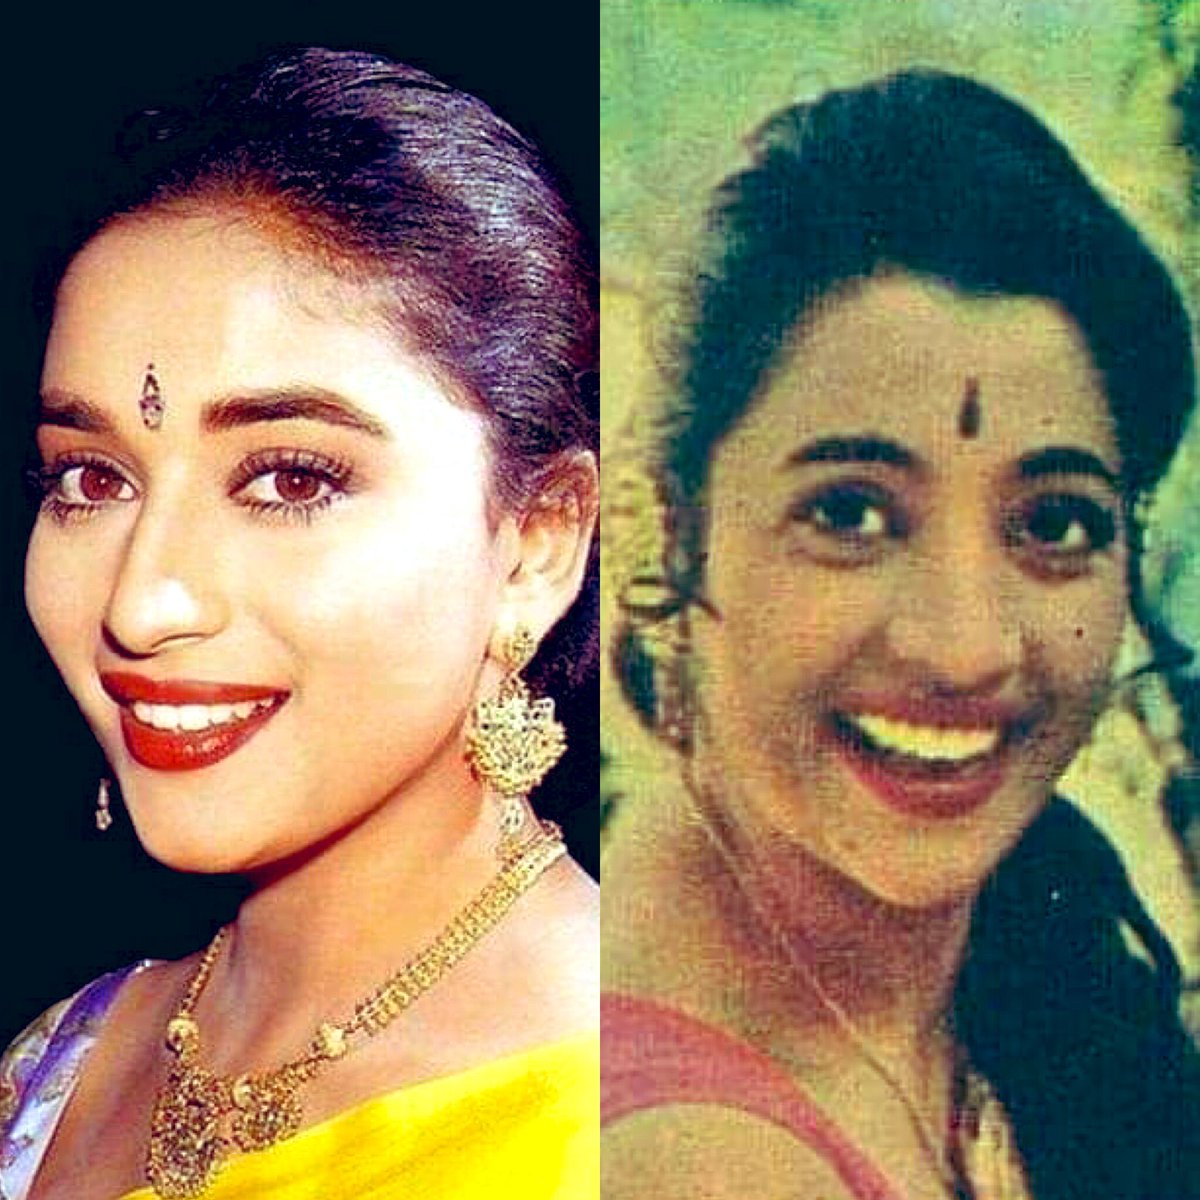 They are so charming uff 🥺💞🔥
@MadhuriDixit #SuchitraSen